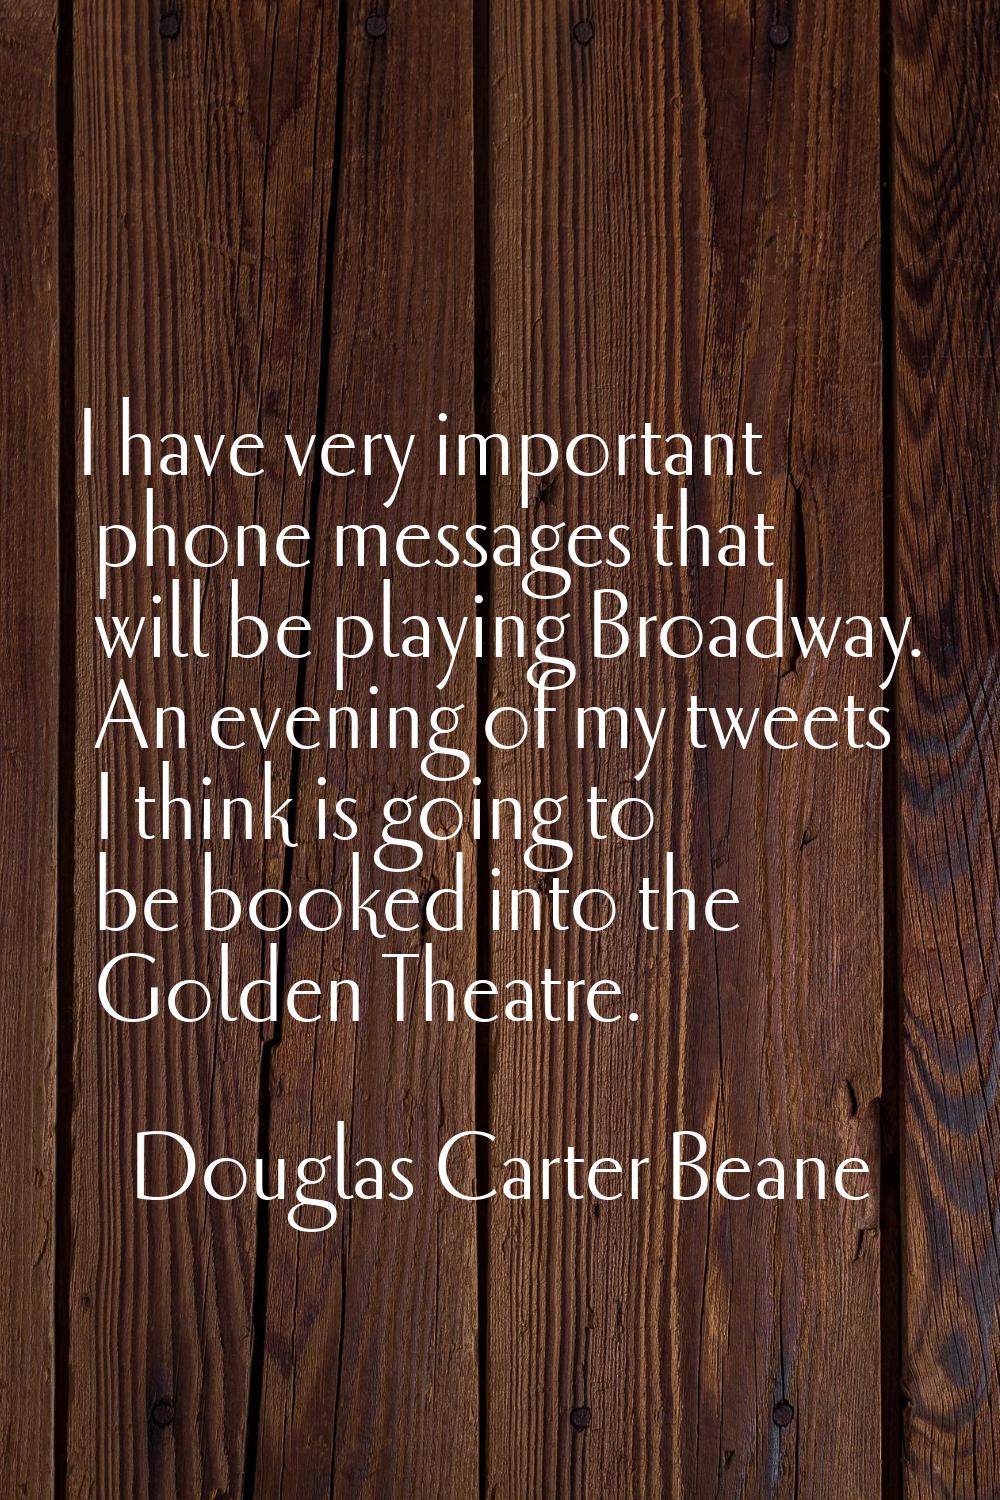 I have very important phone messages that will be playing Broadway. An evening of my tweets I think